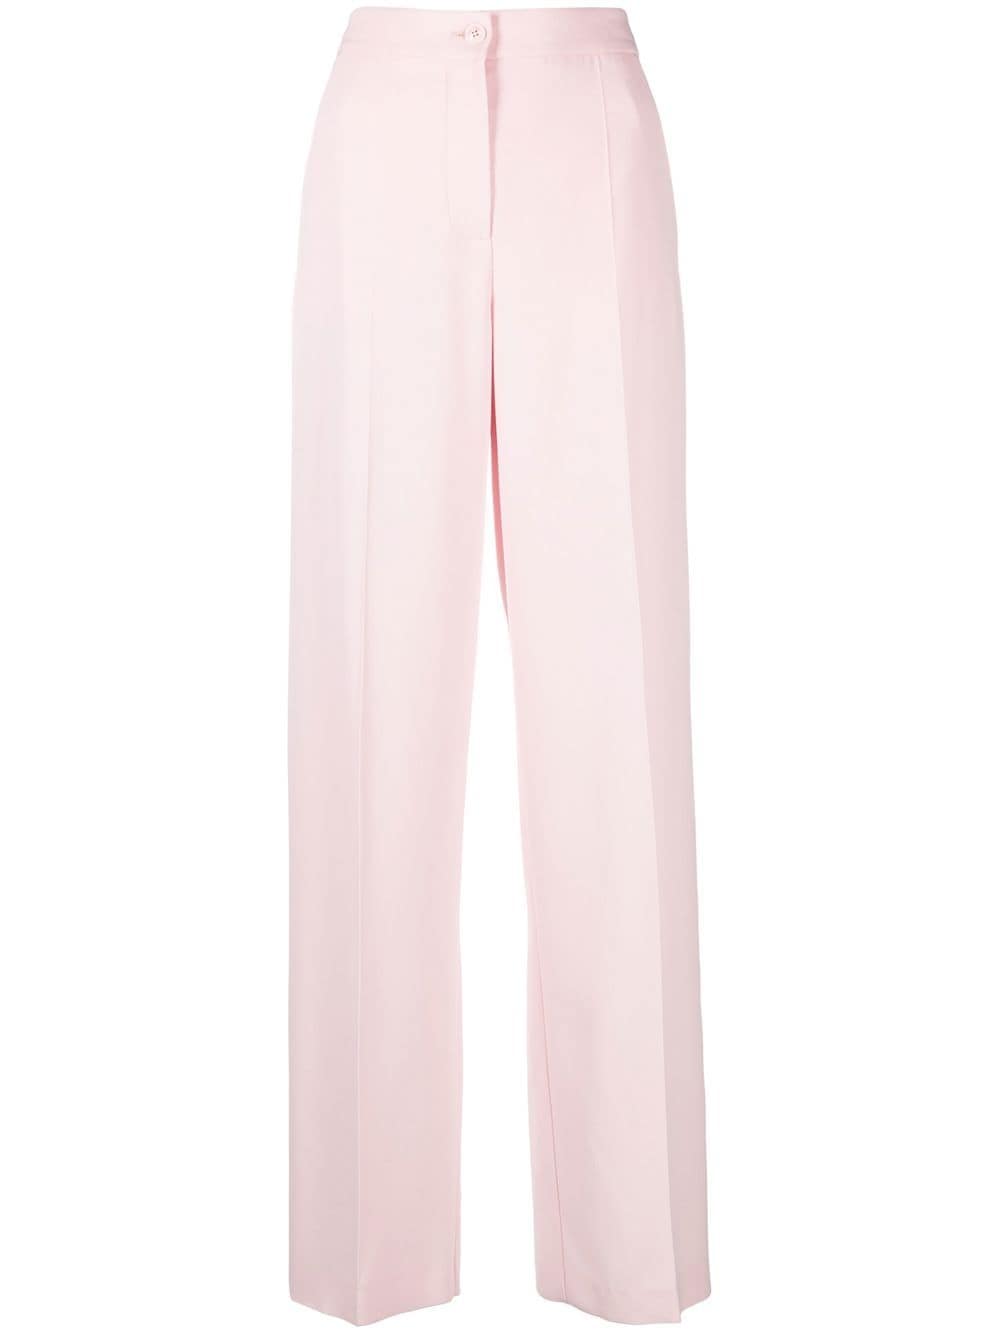 Boutique Moschino high-waisted tailored trousers - Pink von Boutique Moschino